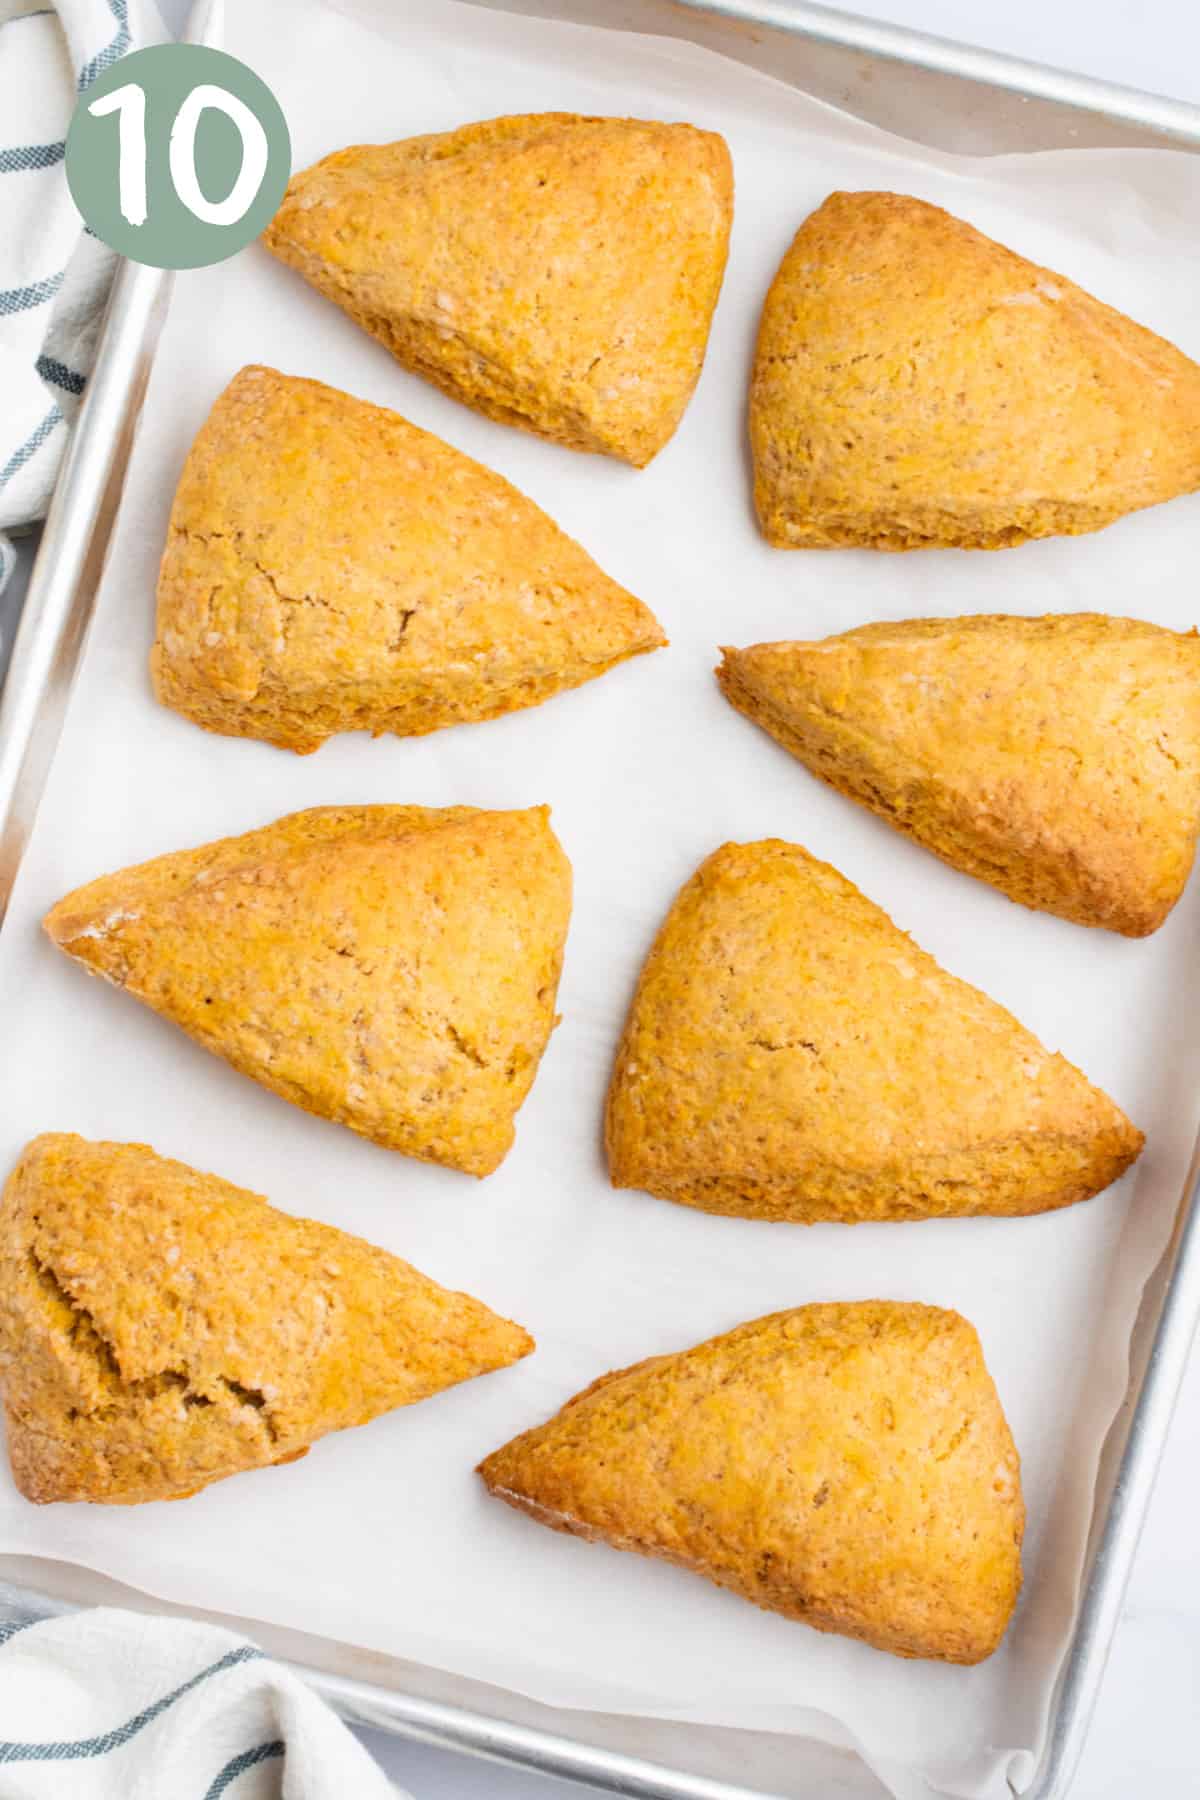 Baked vegan pumpkin scones on a baking sheet lined with parchment paper.